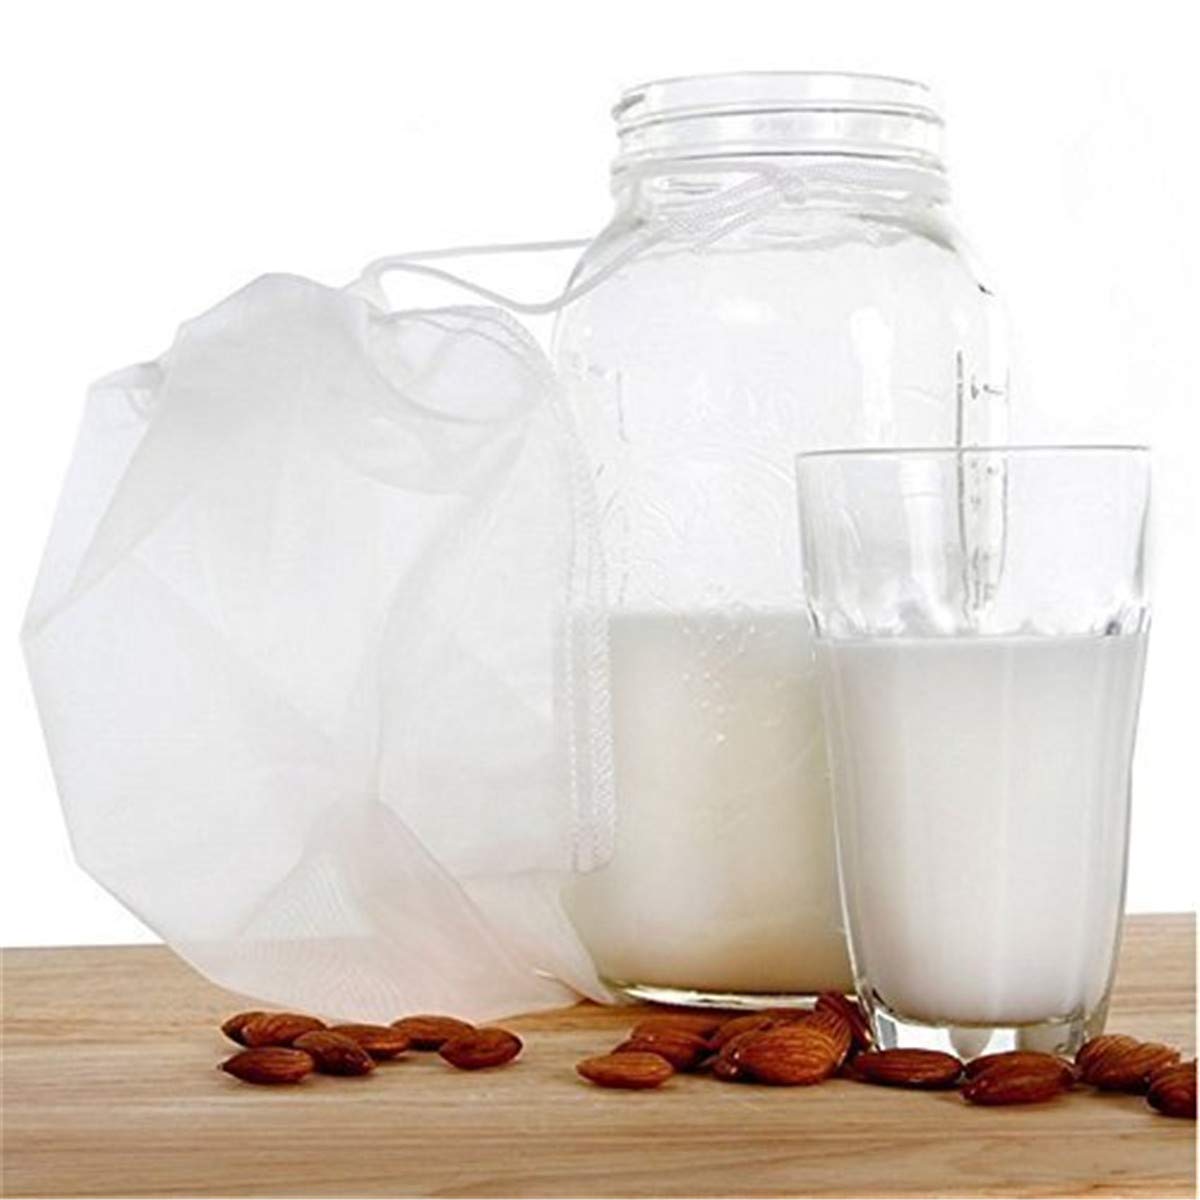 2 Pcs Pro Quality Nut Milk Bag - Big 12"X12" Commercial Grade - Reusable Almond Milk Bag & All Purpose Food Strainer - Fine Mesh Nylon Cheesecloth & Cold Brew Coffee Filter